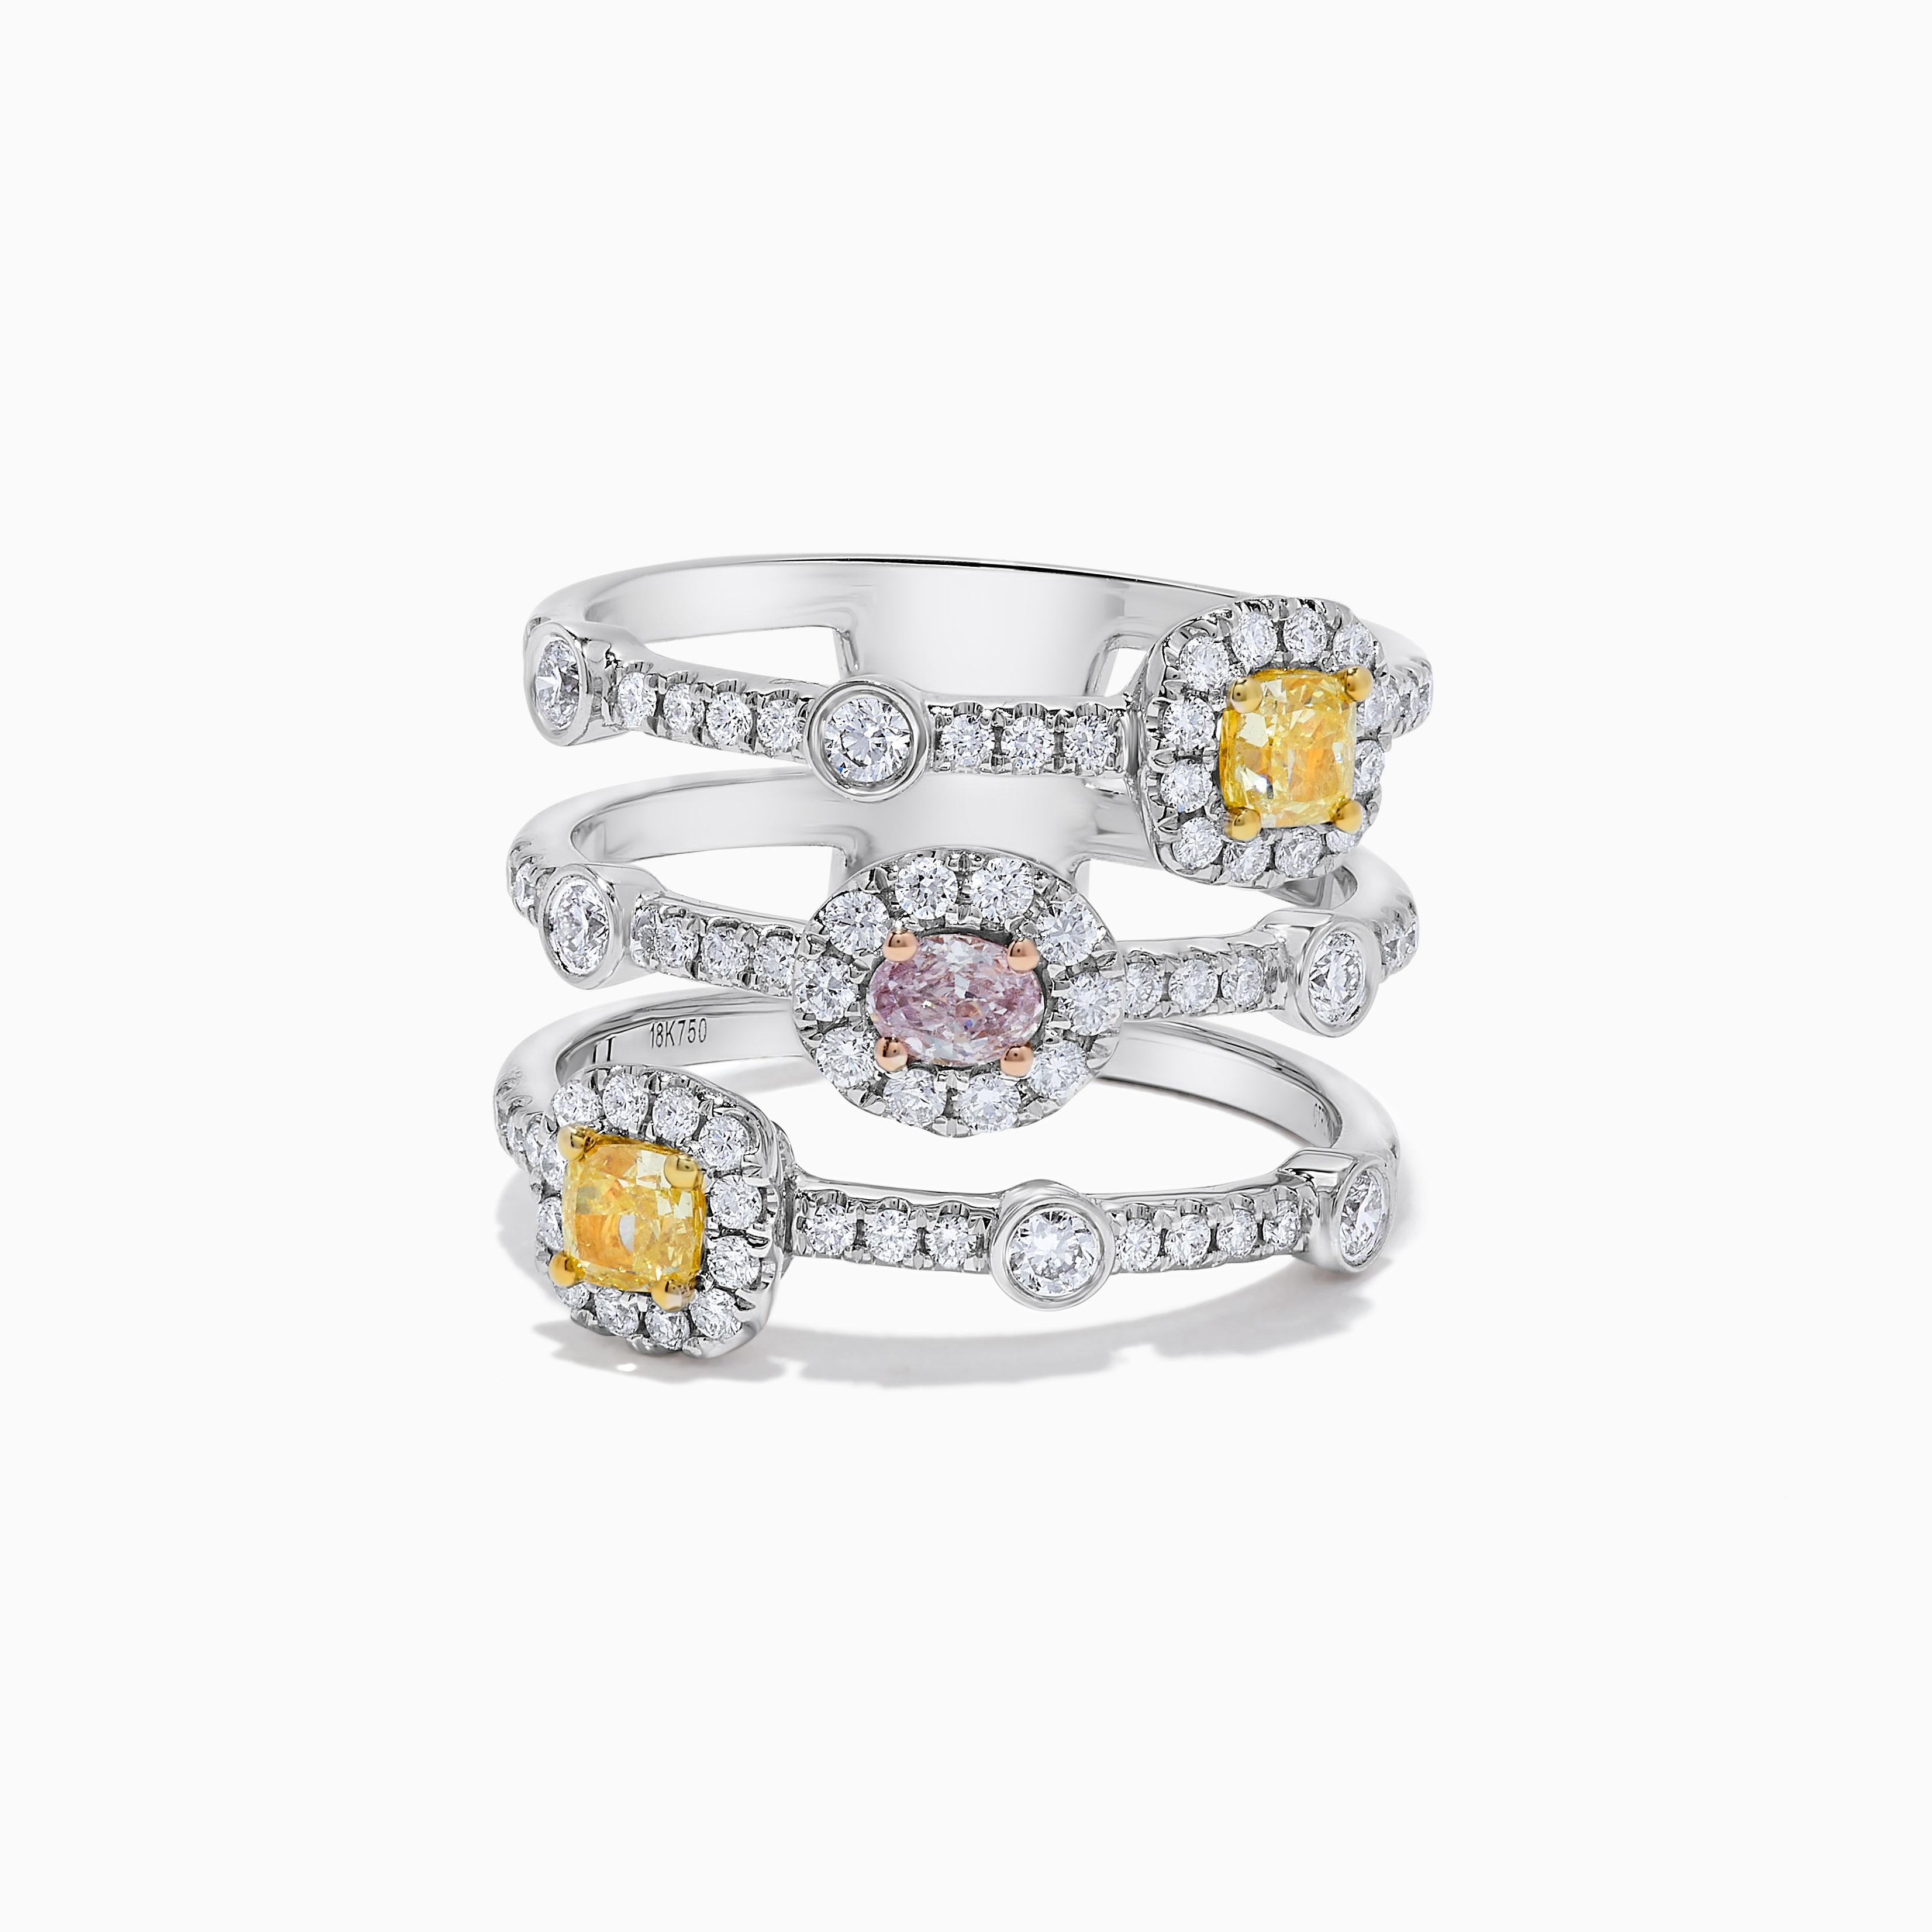 RareGemWorld's classic GIA certified diamond ring. Mounted in a beautiful 18K Rose and White Gold setting with a natural oval cut pink diamond as well as two natural cushion cut yellow diamonds. The oval diamonds are surrounded by round natural